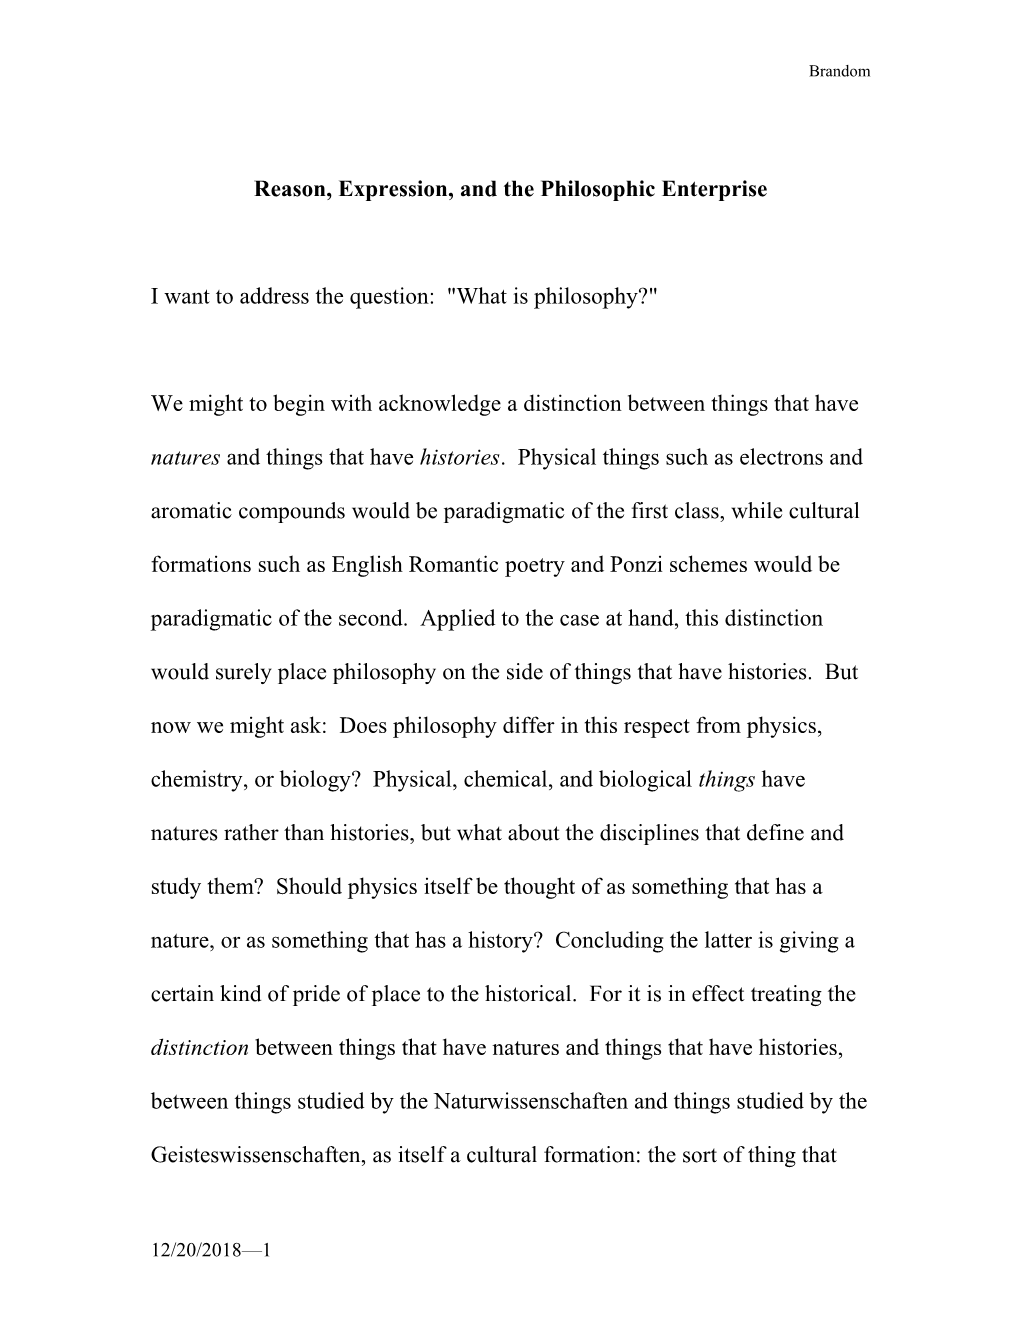 Reason, Expression, and the Philosophic Enterprise